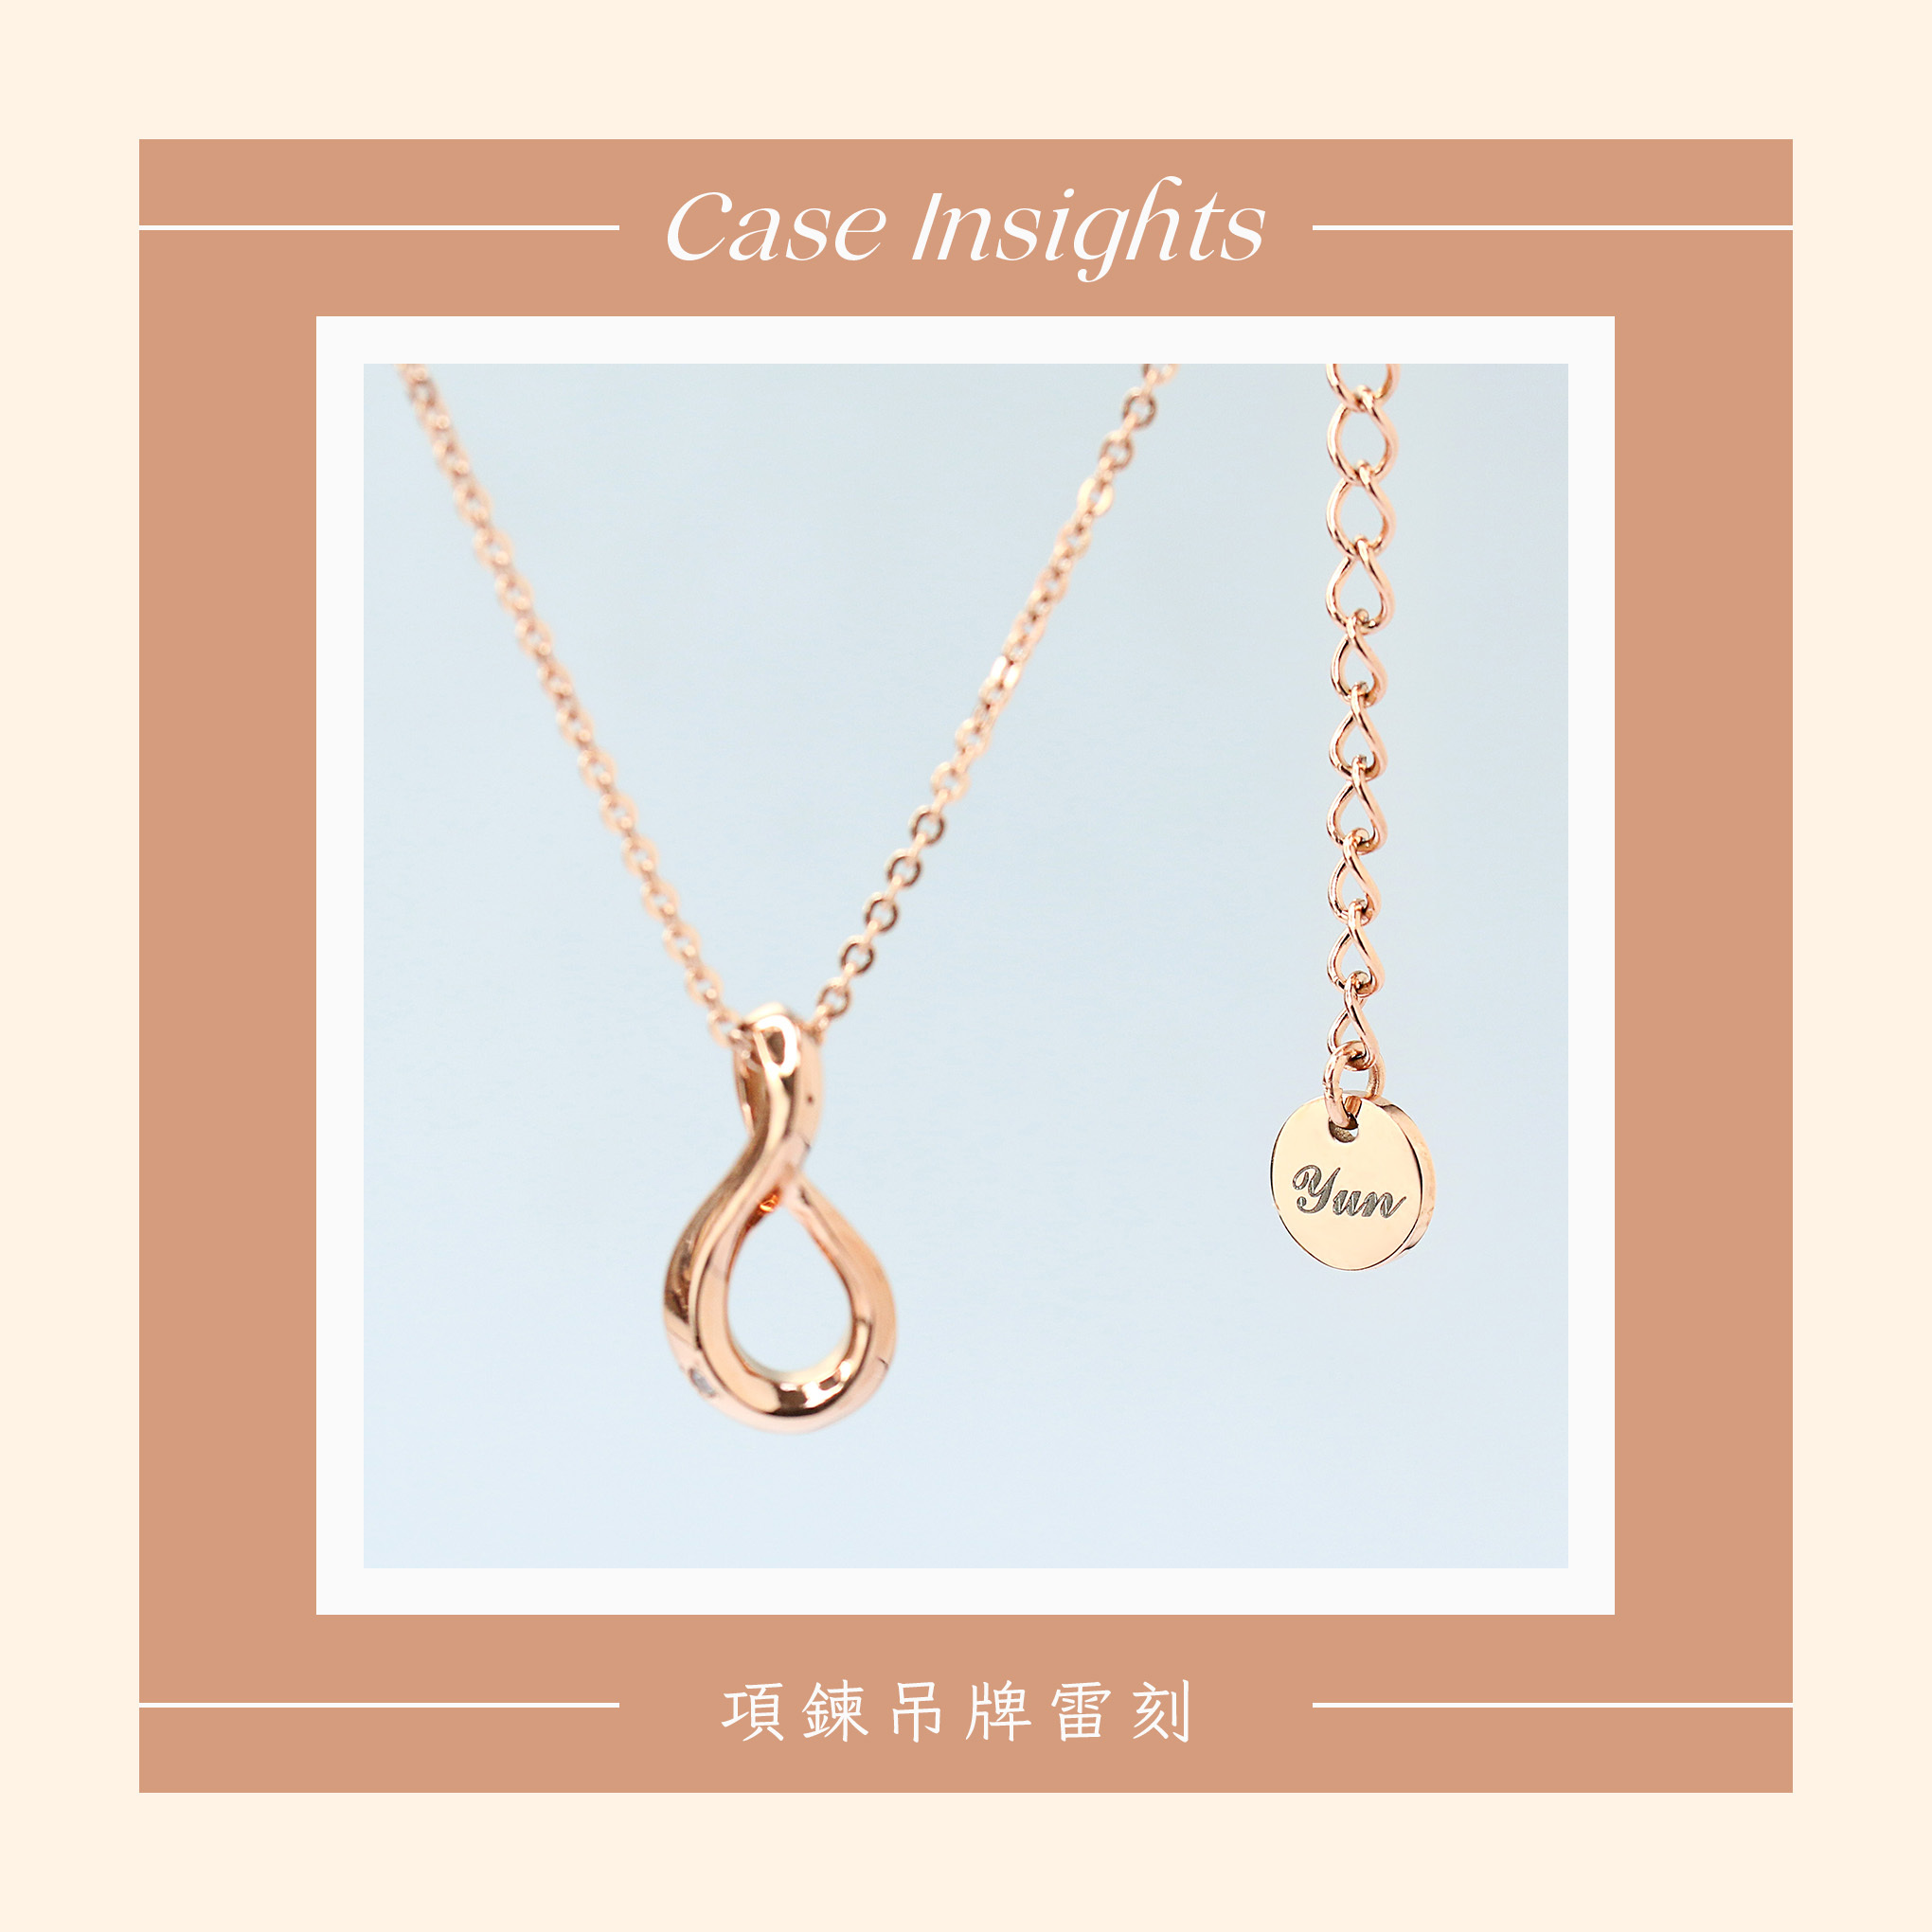 Case insights 03